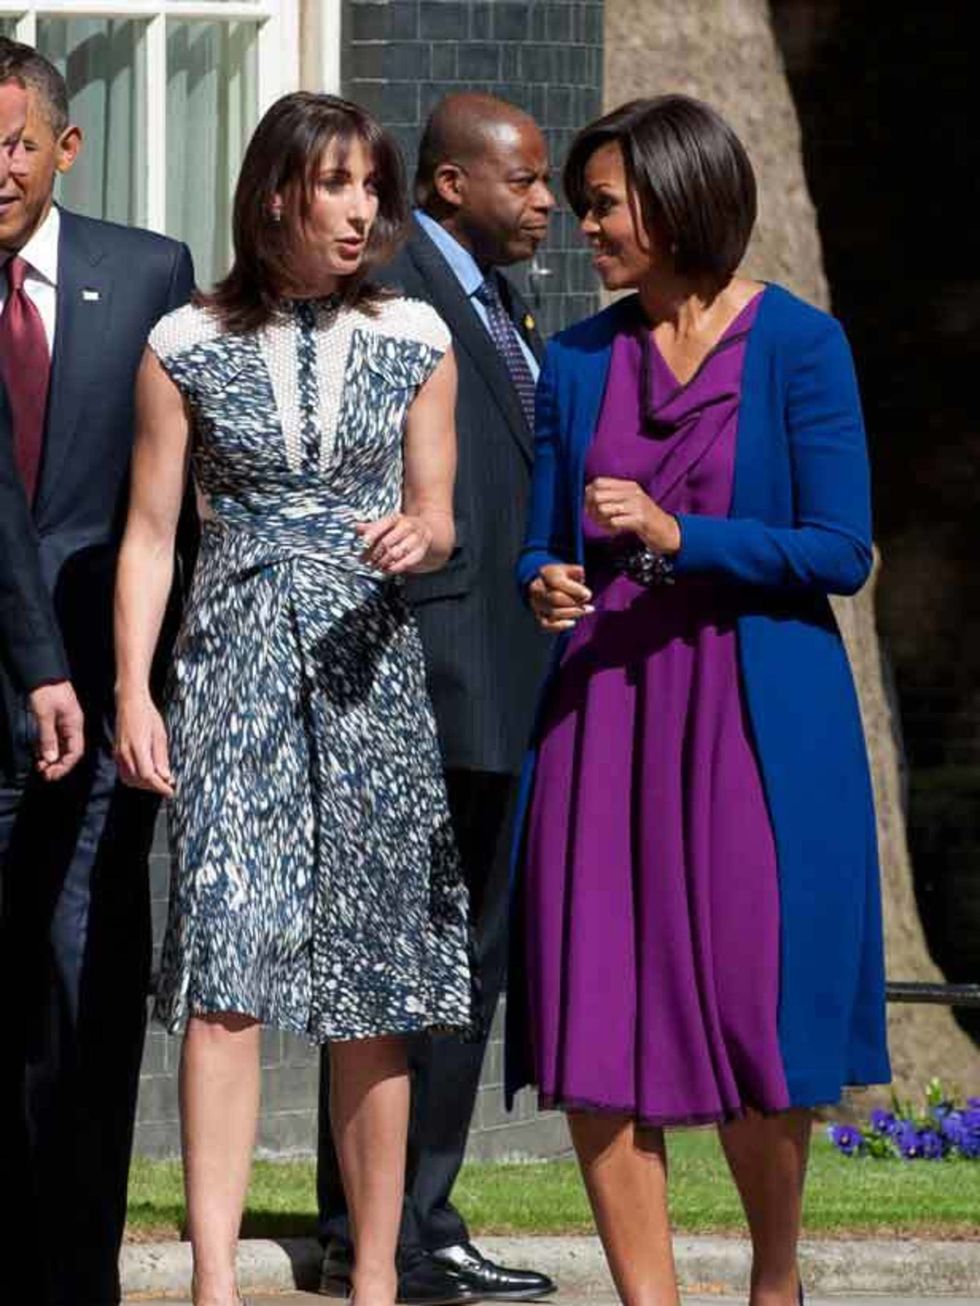 <p><a href="http://www.elleuk.com/starstyle/style-files/(section)/michelle-obama">Michelle Obama</a> in <a href="http://www.elleuk.com/catwalk/collections/roksanda-ilincic/autumn-winter-2011/collection">Roksanda Ilinic</a> &amp; <a href="http://www.elleuk